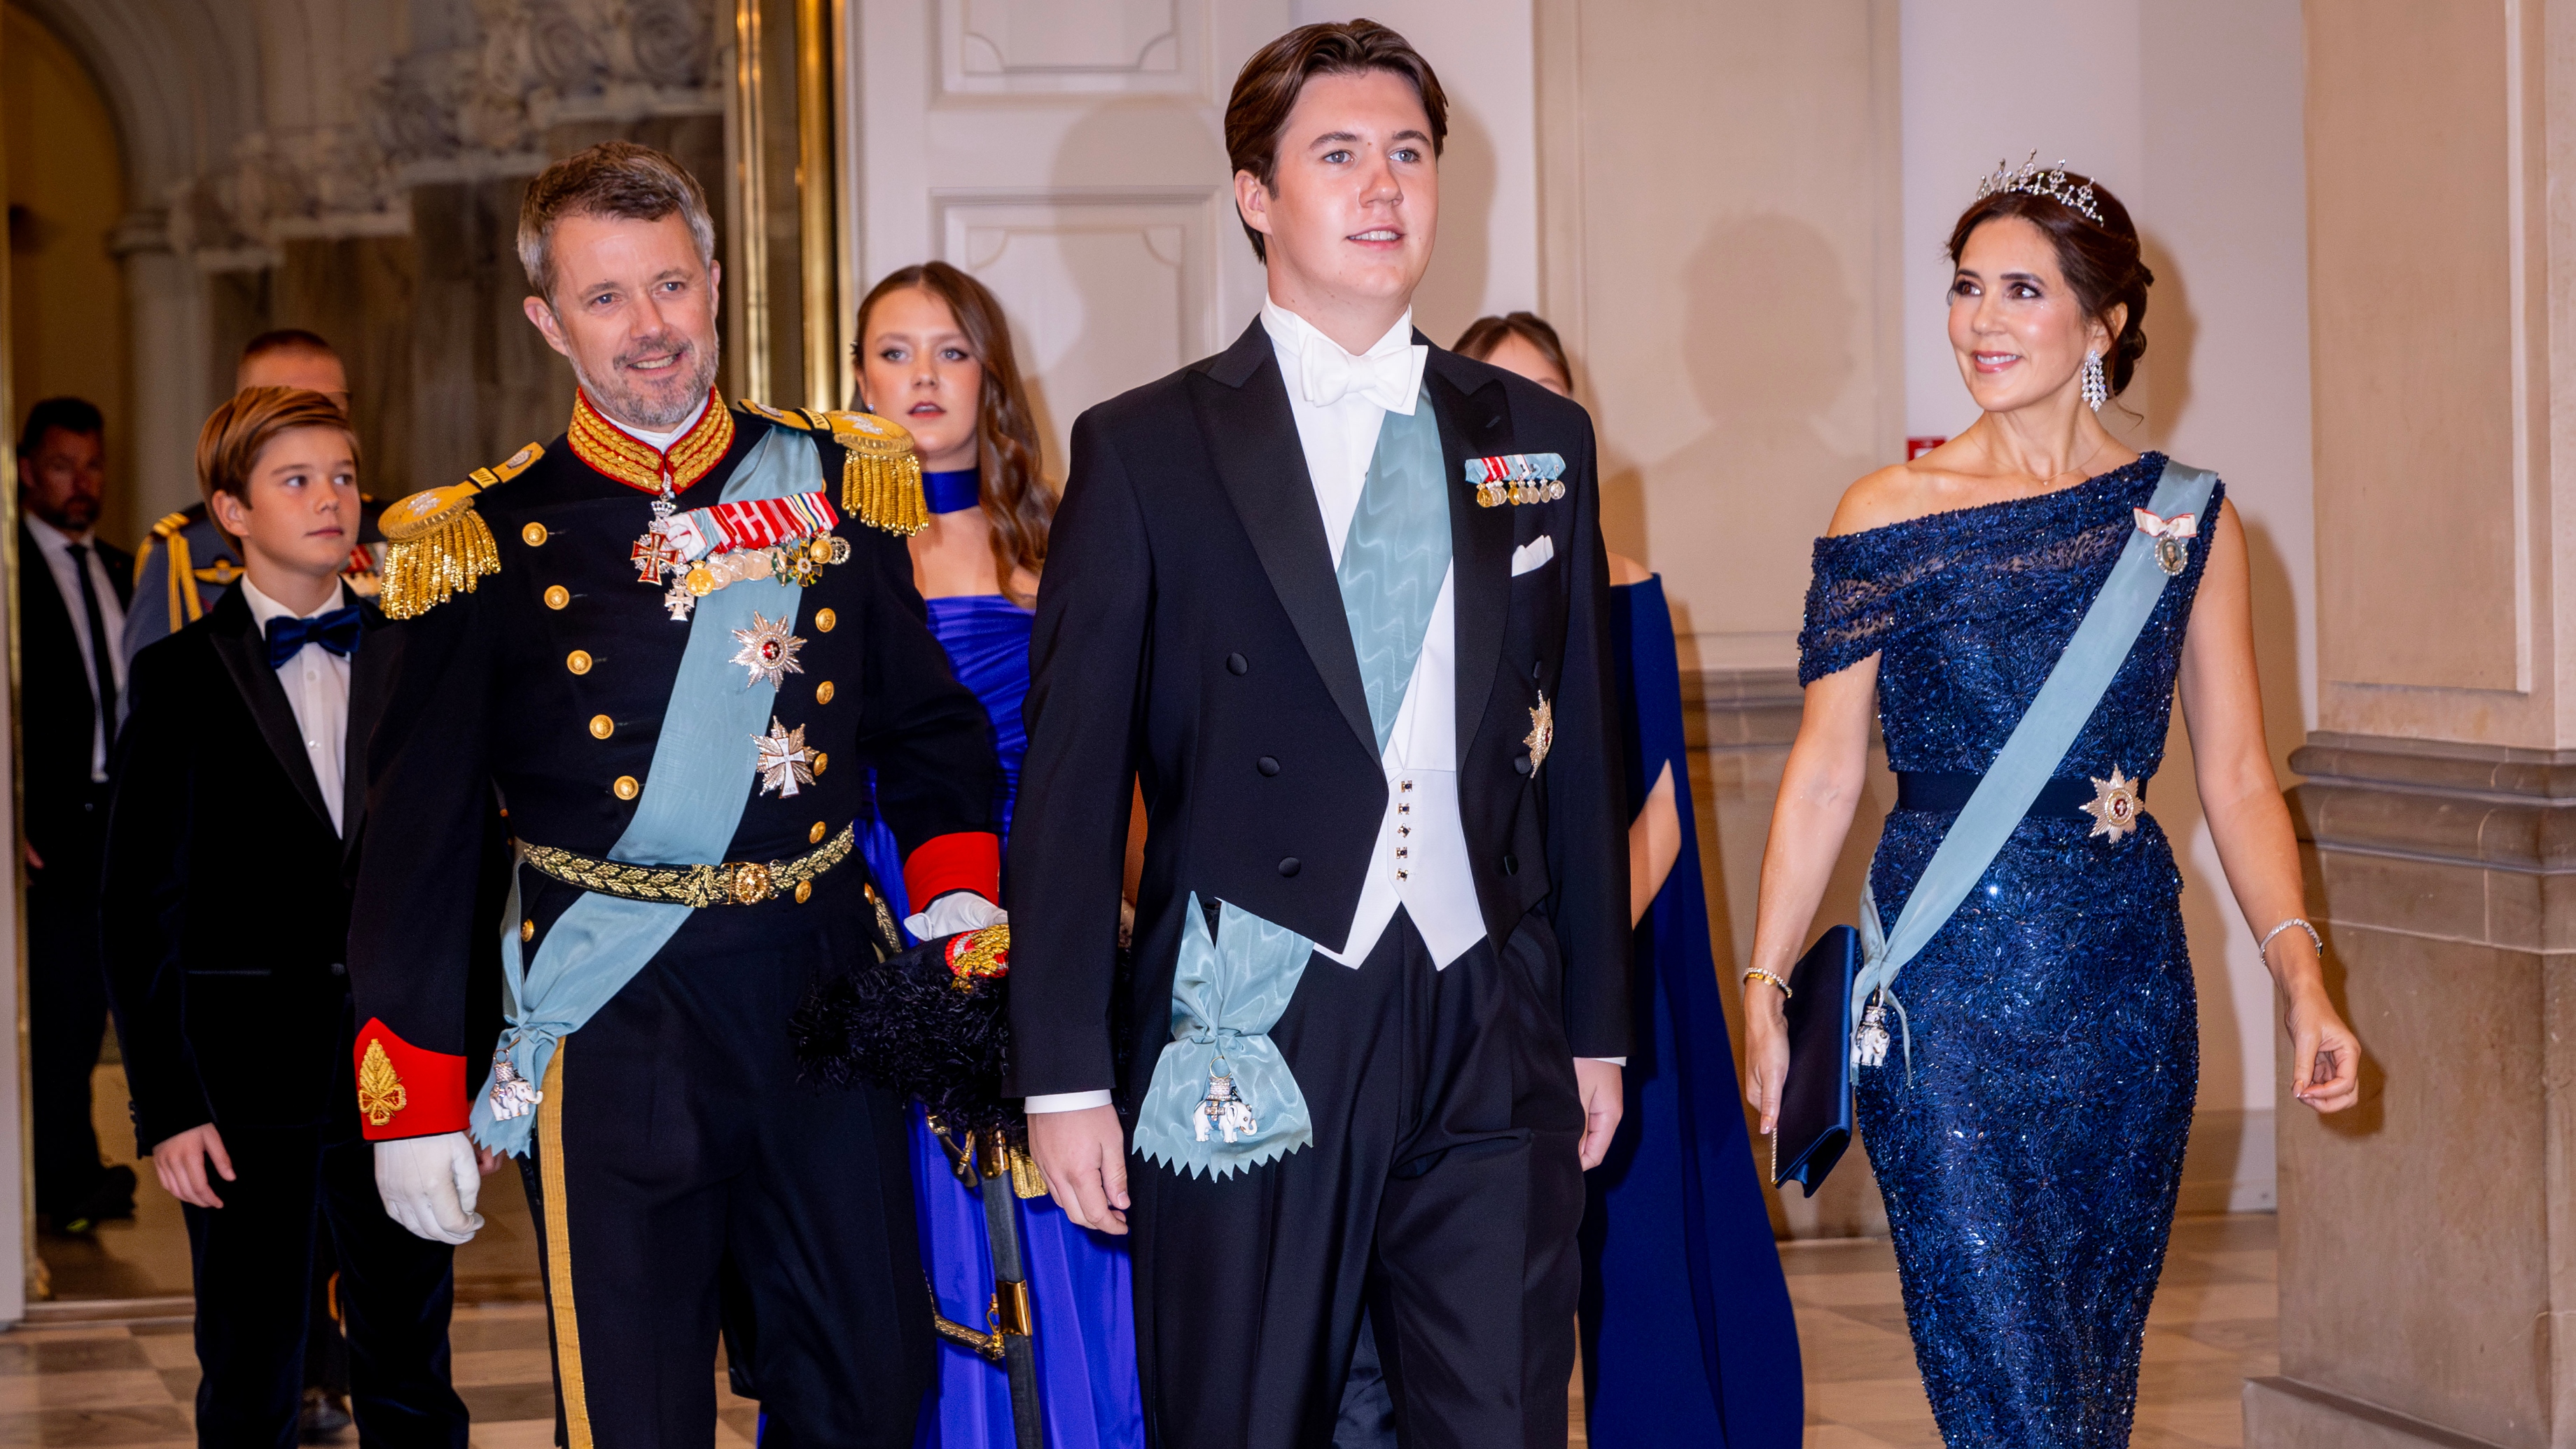 Prince Vincent of Denmark, Crown Prince Frederik of Denmark, Princess Isabella of Denmark, Prince Christian of Denmark, Princess Josephine of Denmark and Crown Princess Mary of Denmark attend the gala diner to celebrate the 18th birthday of H.K.H. Prince Christian